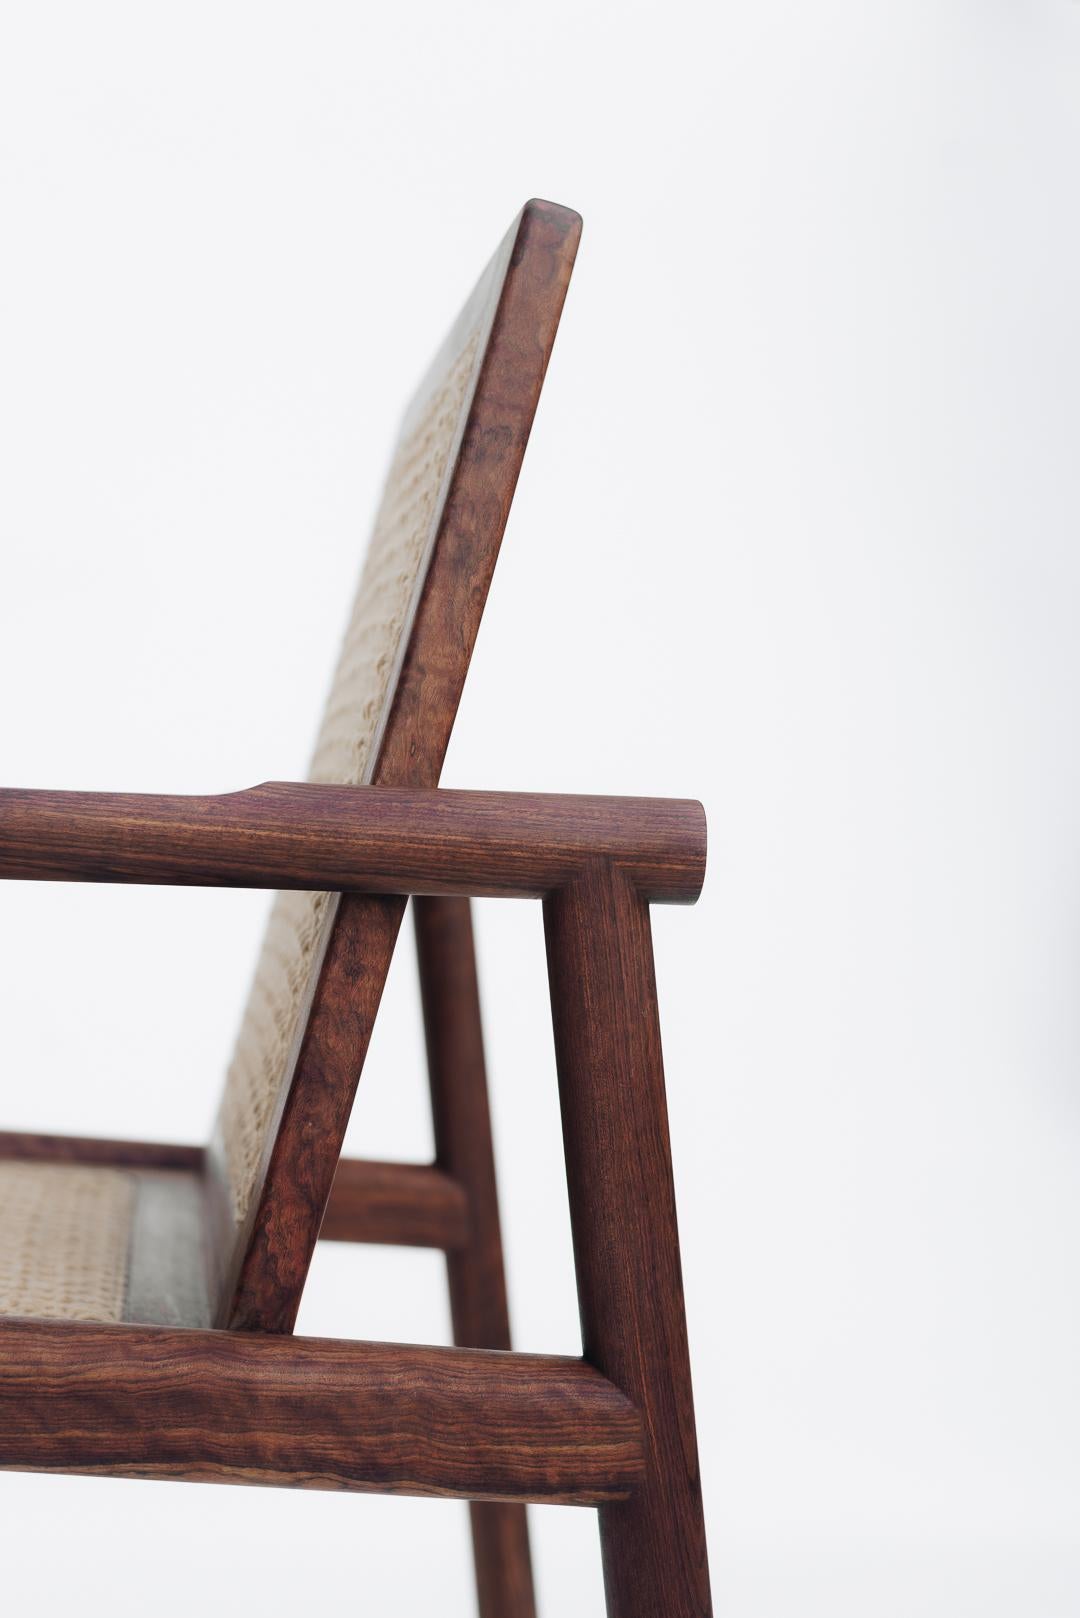 Turned Hand-Woven Contemporary Chair in Chechén Tropical Wood For Sale